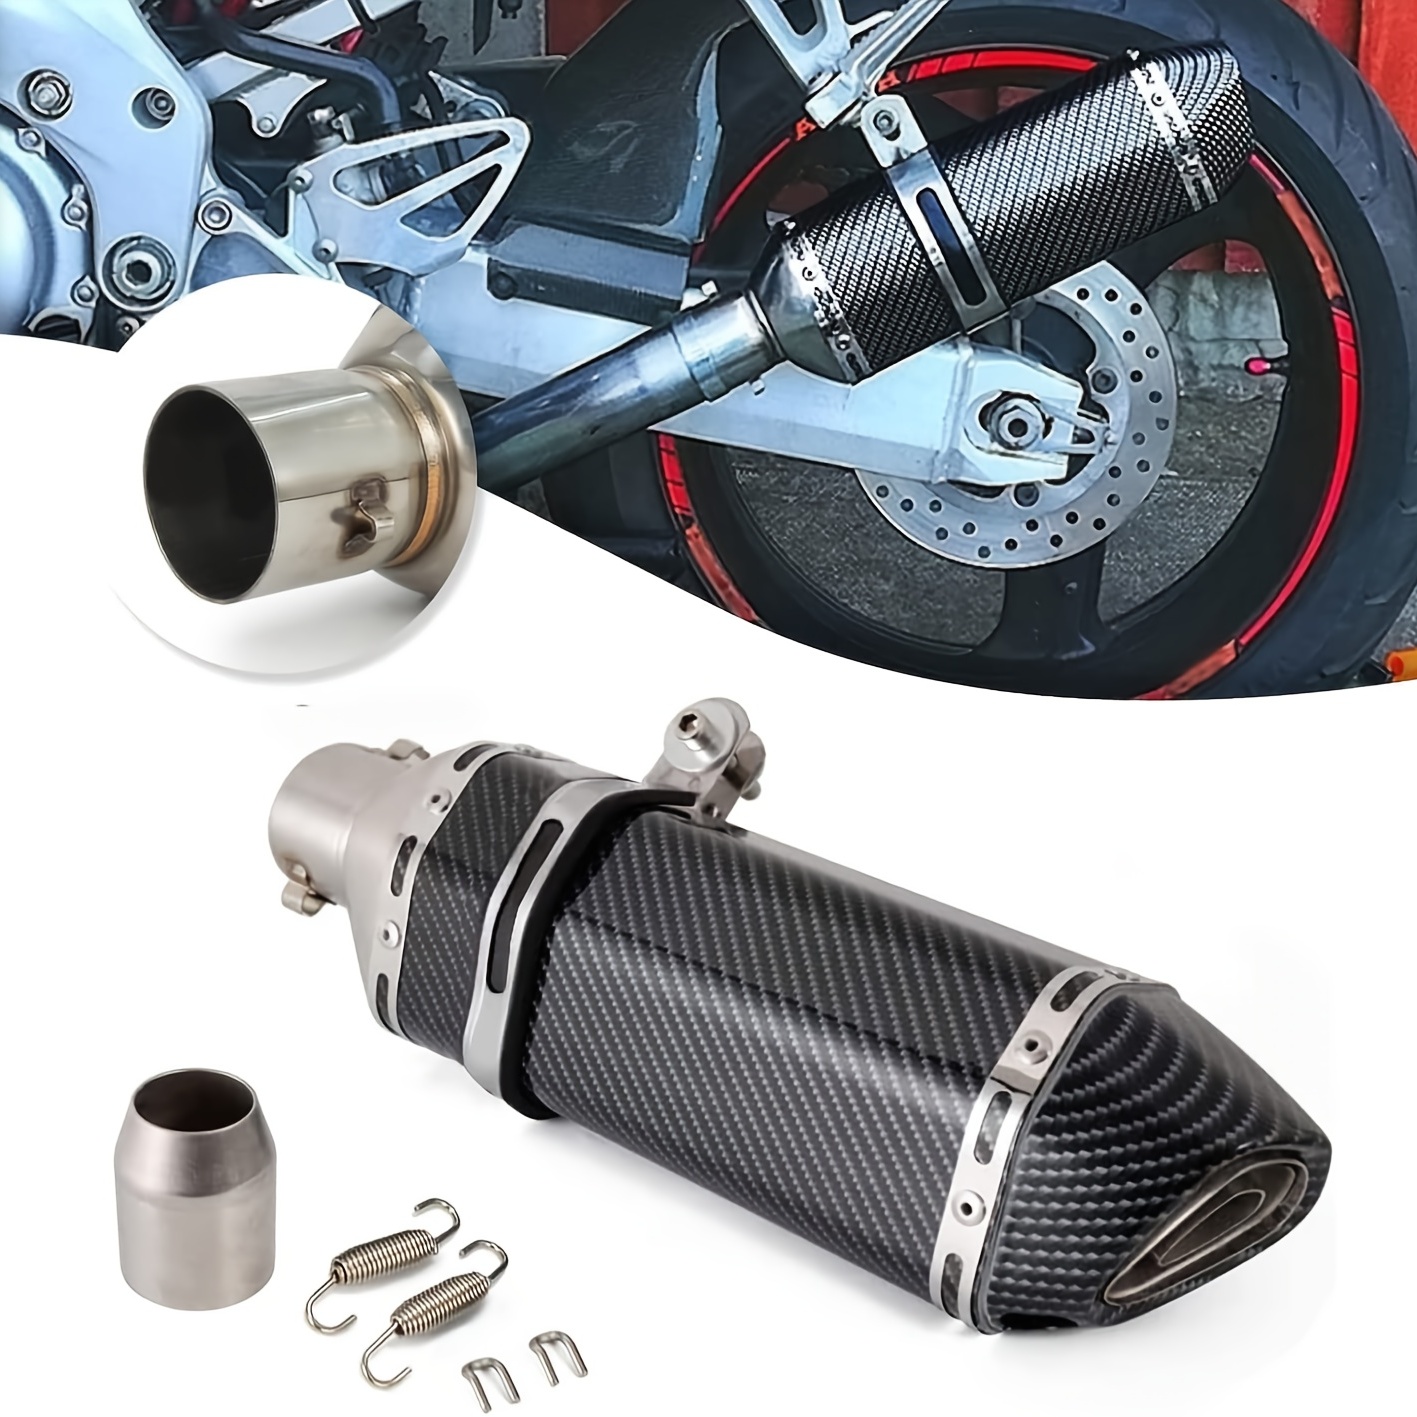 Motorcycle Exhaust Carbon Fiber Slip On Exhaust 1.5-2 38-51mm Inlet  Muffler With Removable DB Killer Universal For Dirt Street Bike Scooter